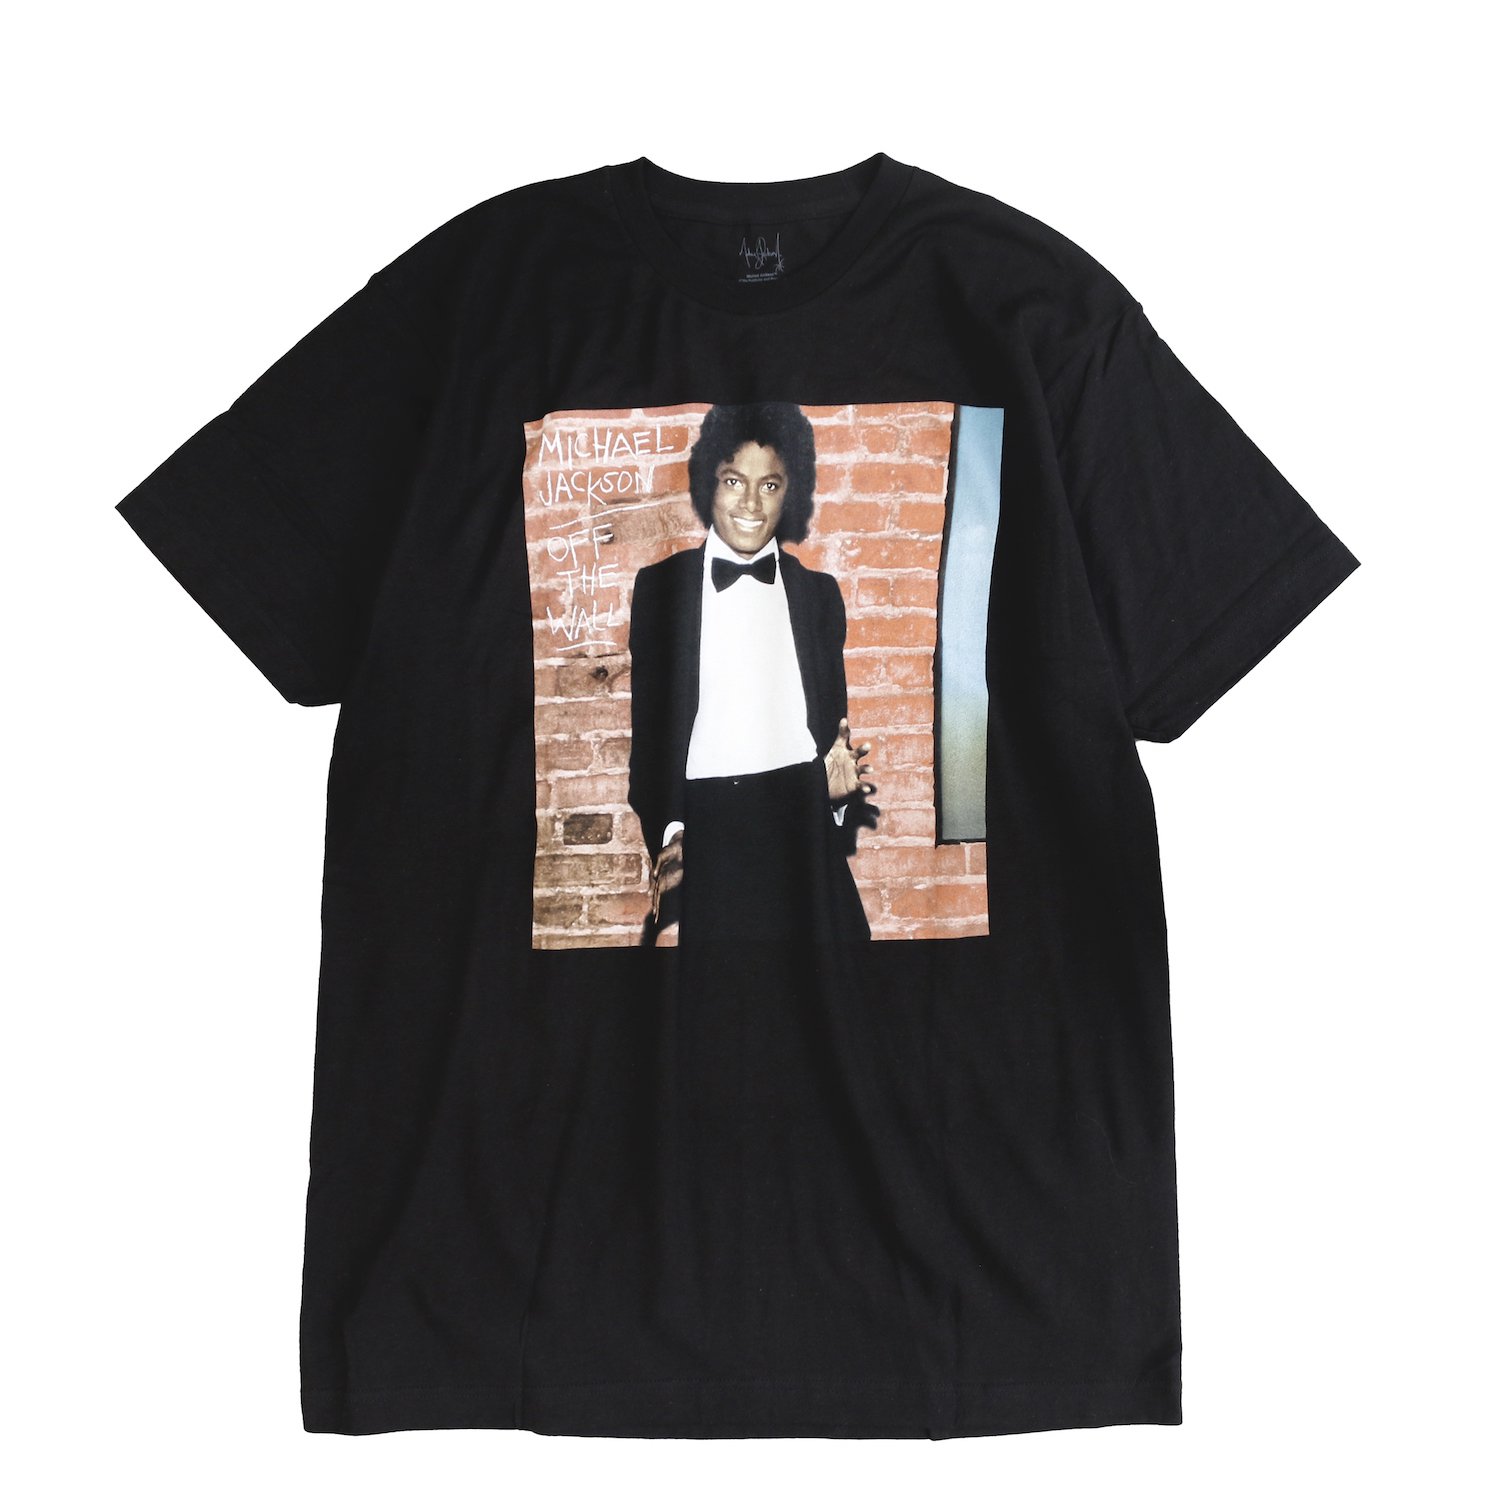 <img class='new_mark_img1' src='https://img.shop-pro.jp/img/new/icons8.gif' style='border:none;display:inline;margin:0px;padding:0px;width:auto;' /> Music Tee / S/S MICHAEL JACKSON 